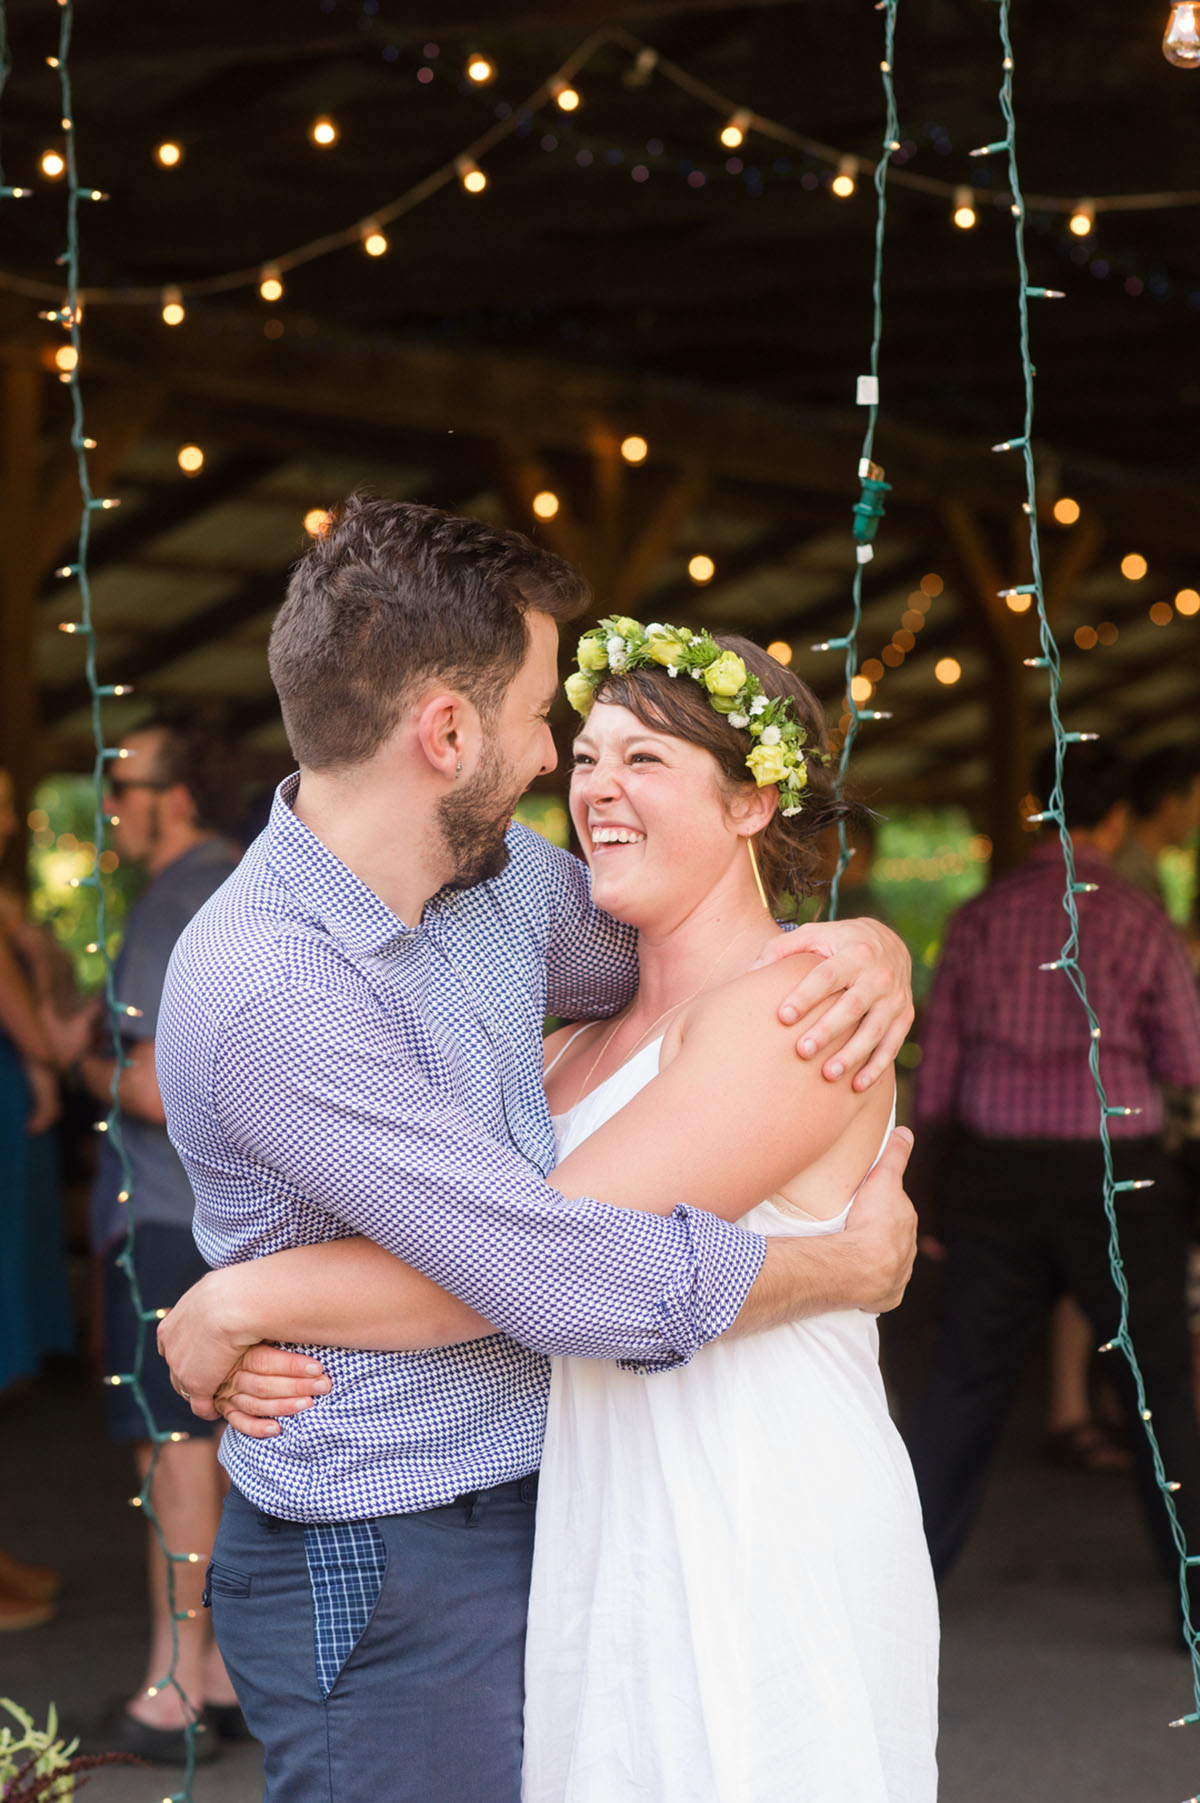 Lesbian wedding with summer garden and creative floral bouquets dance